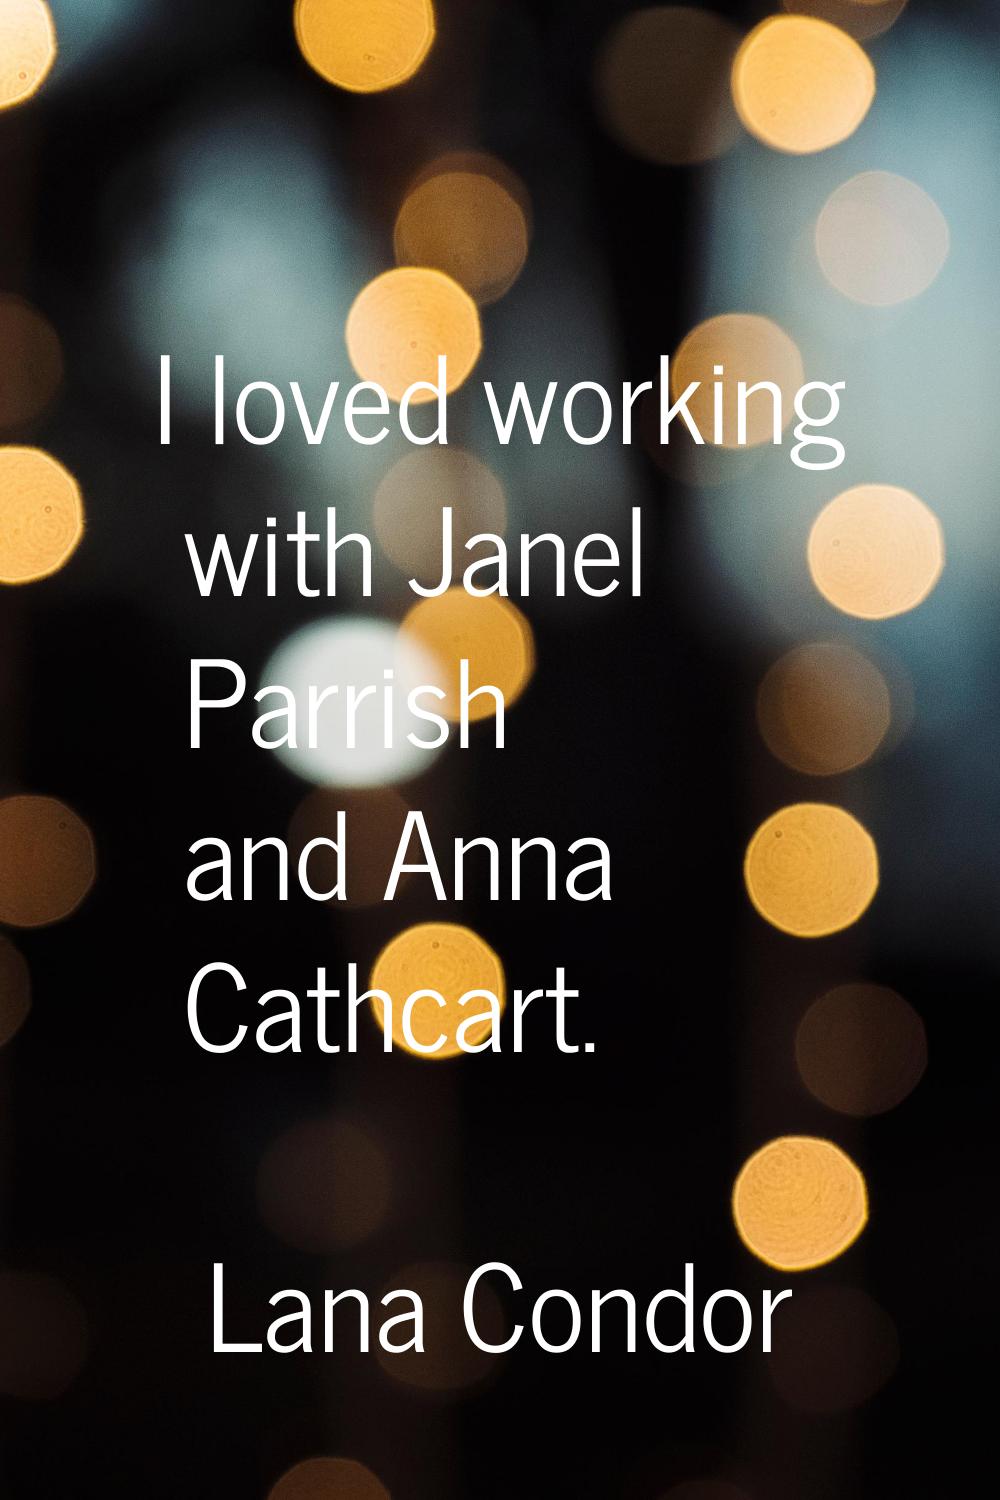 I loved working with Janel Parrish and Anna Cathcart.